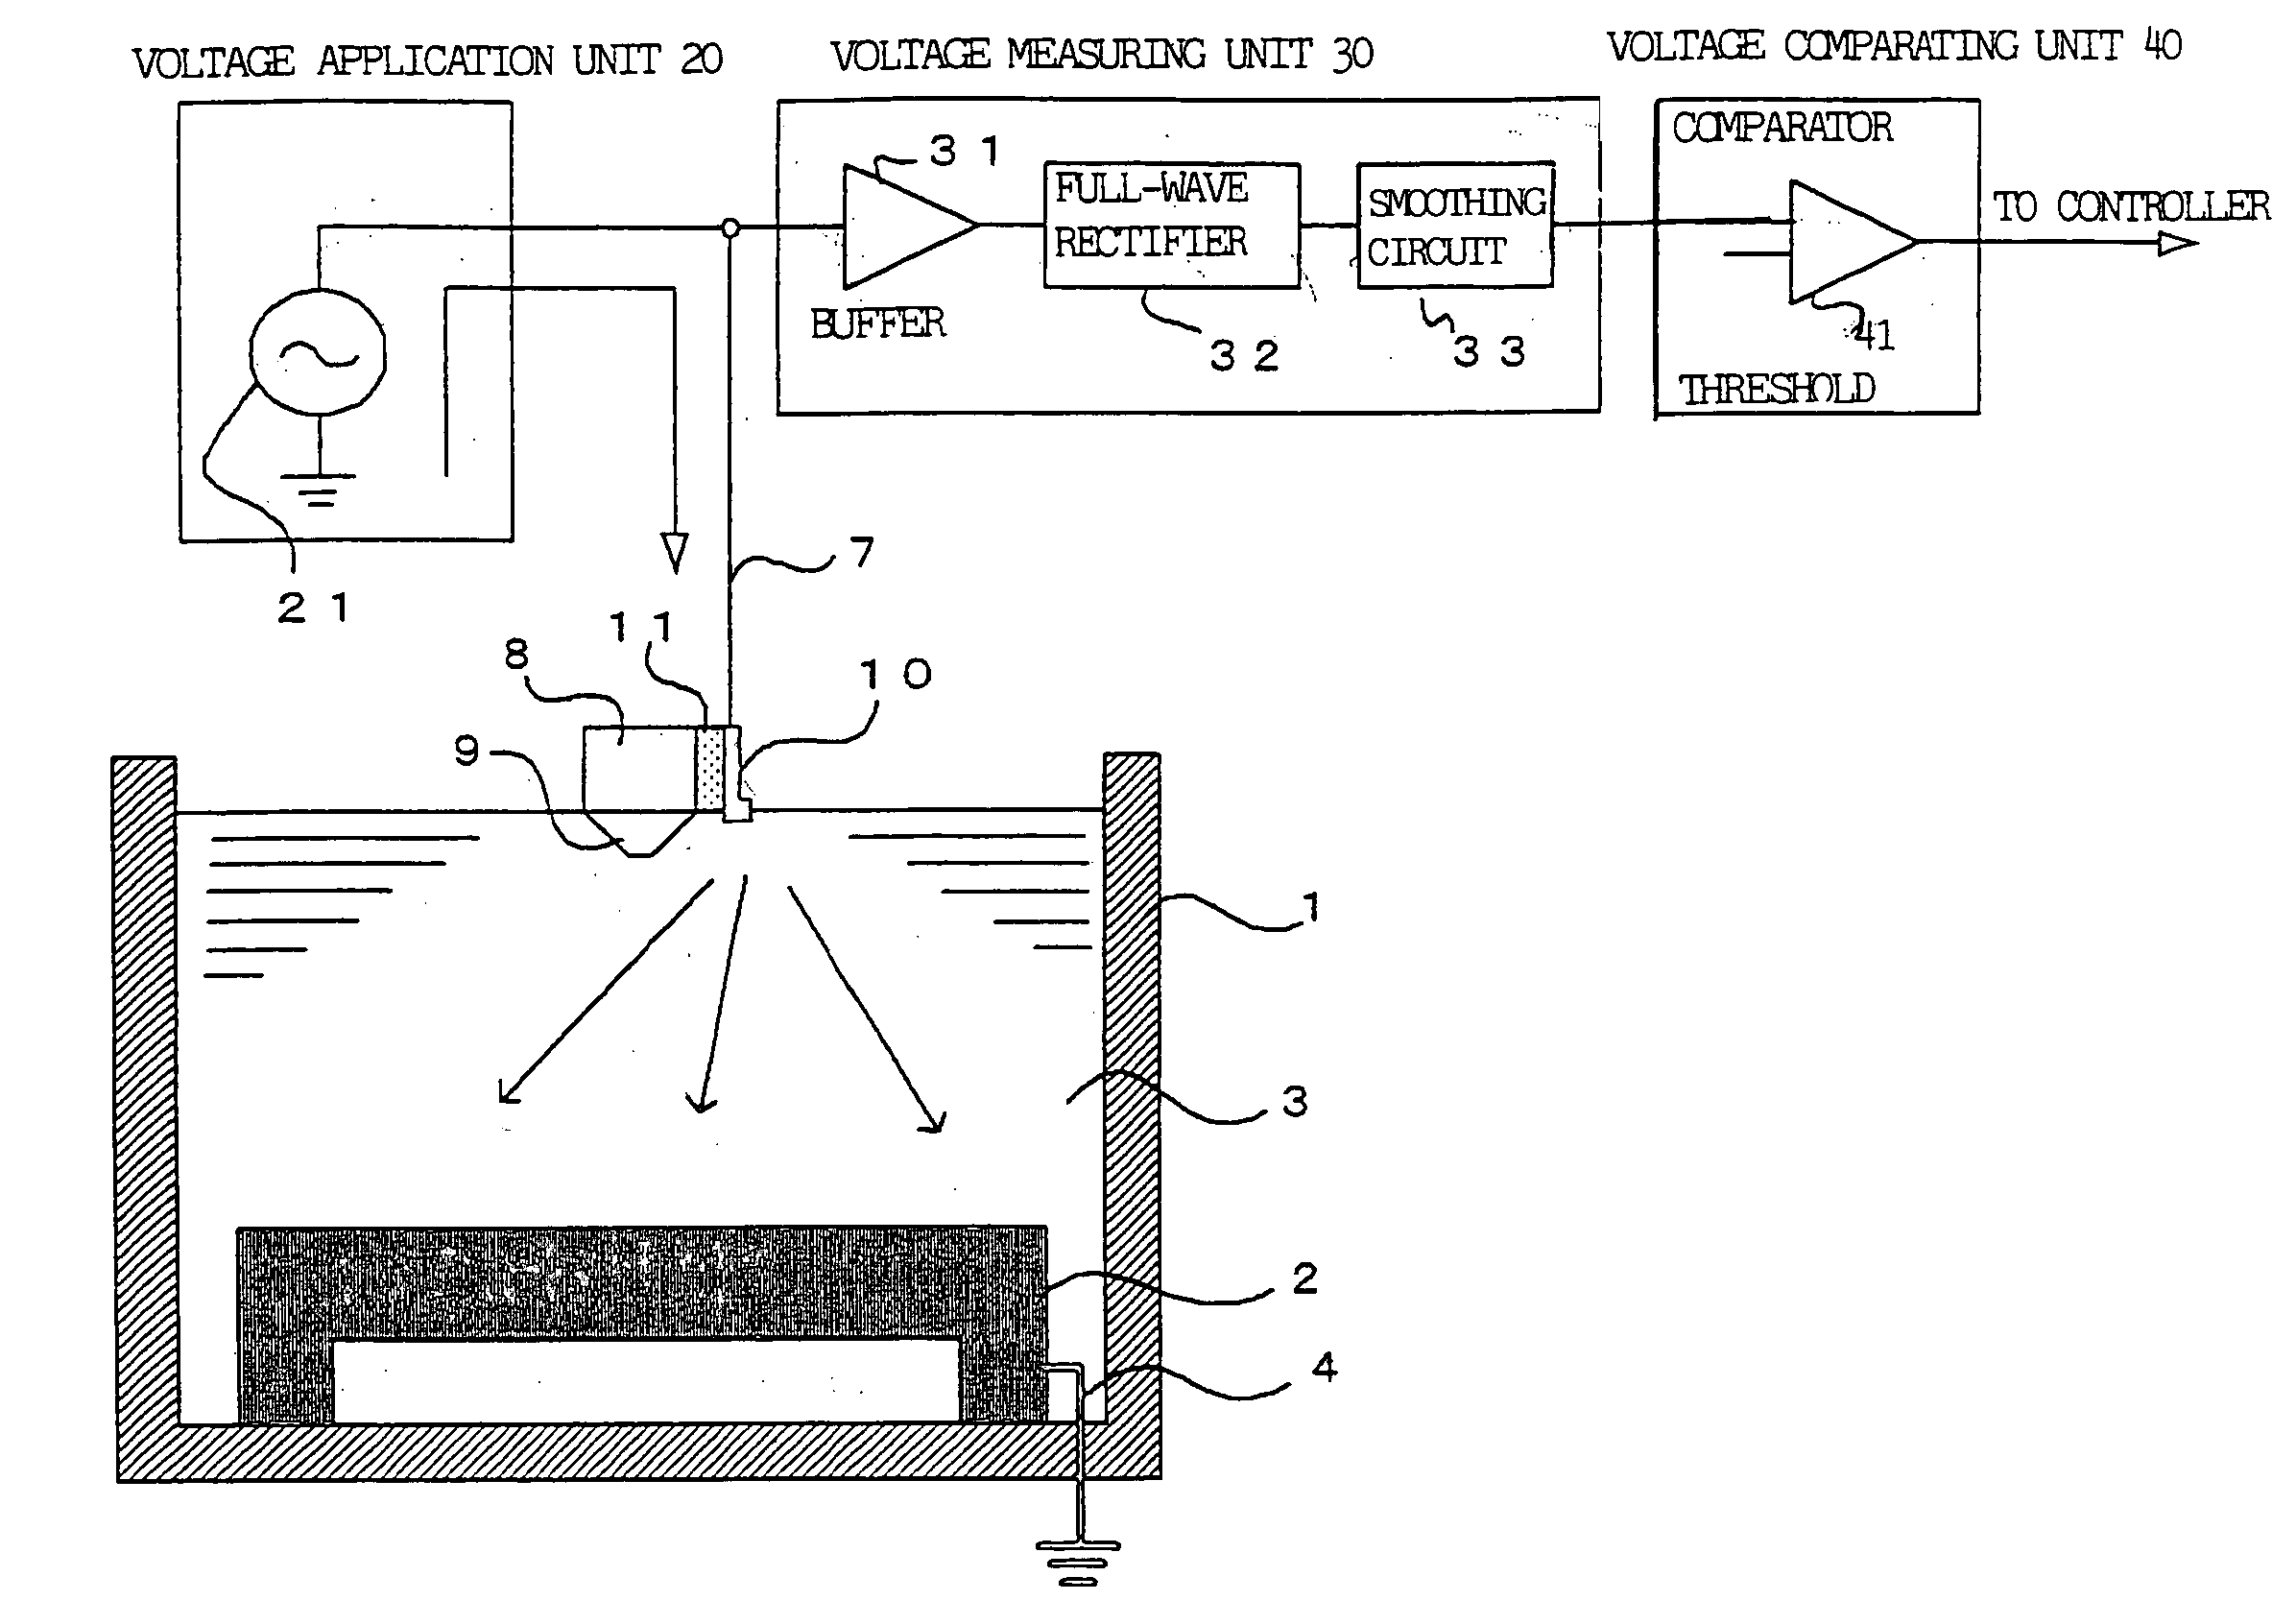 Machining fluid level detection device for wire cut electrical discharge machines